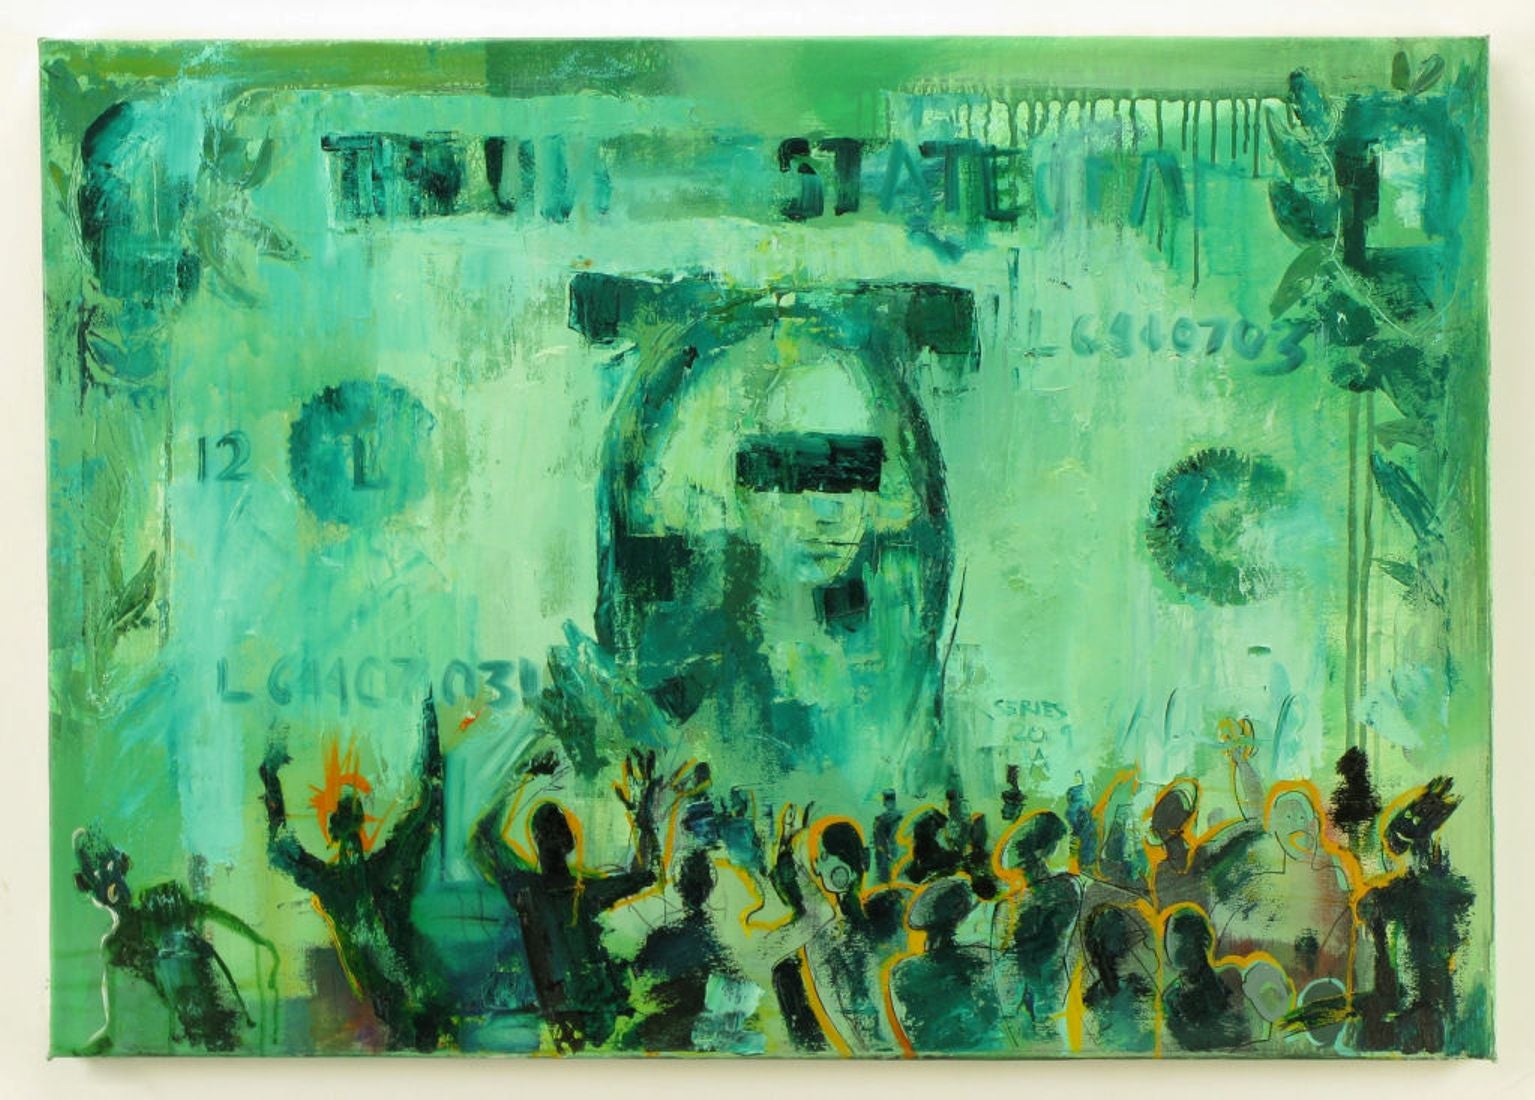 1999 Contemporary Russian Abstract Oil on Canvas Depicting Dollar Bill